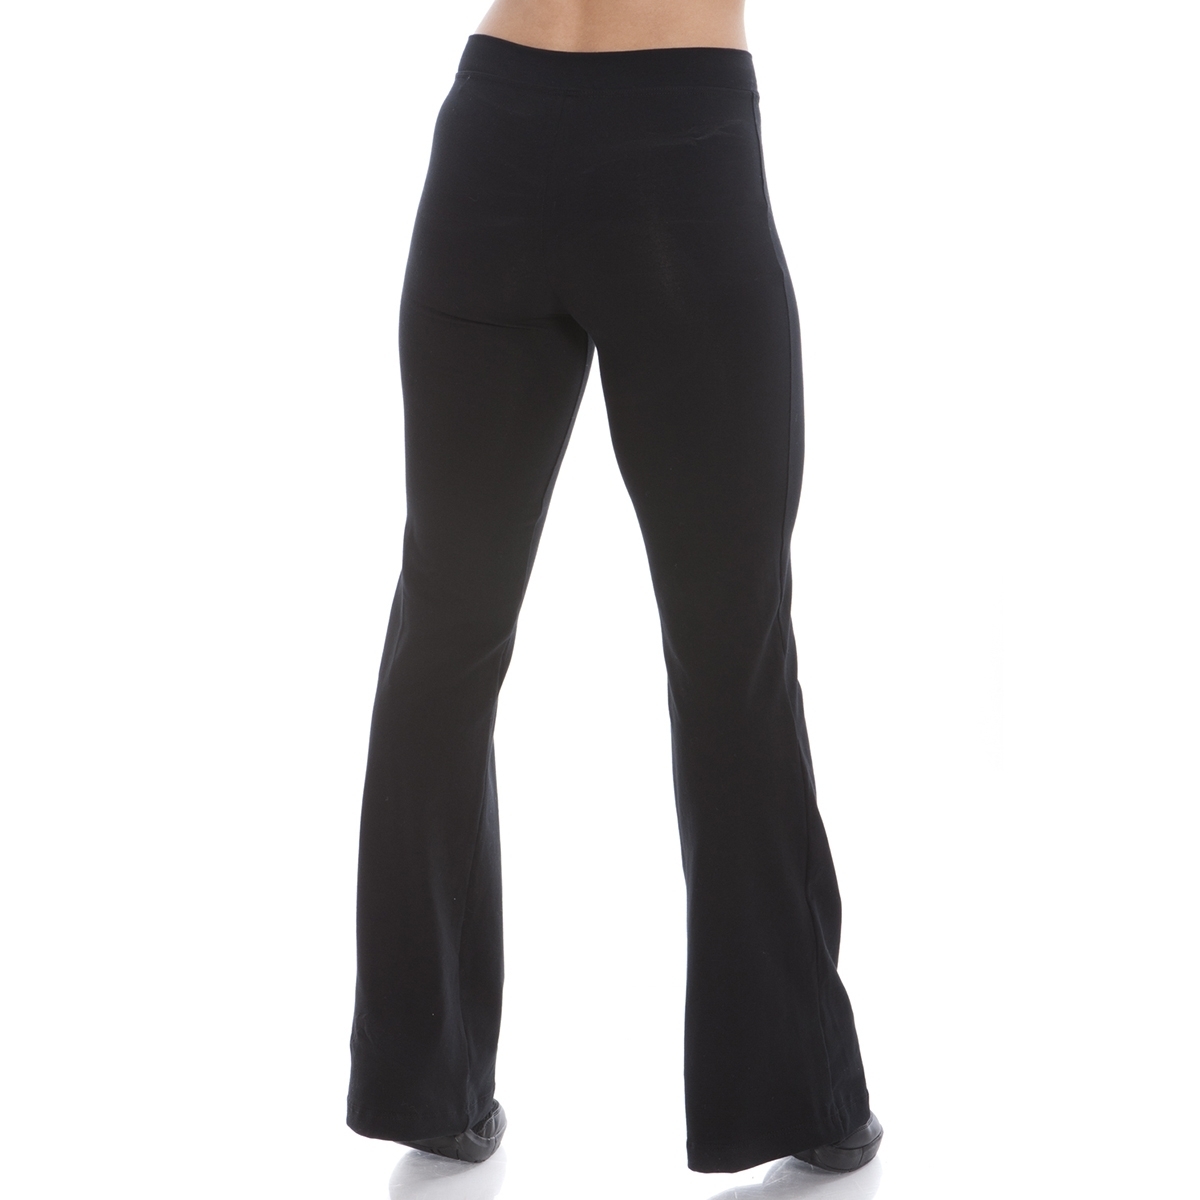 Energetiks Harlow Pant - CottonLuxe Adult